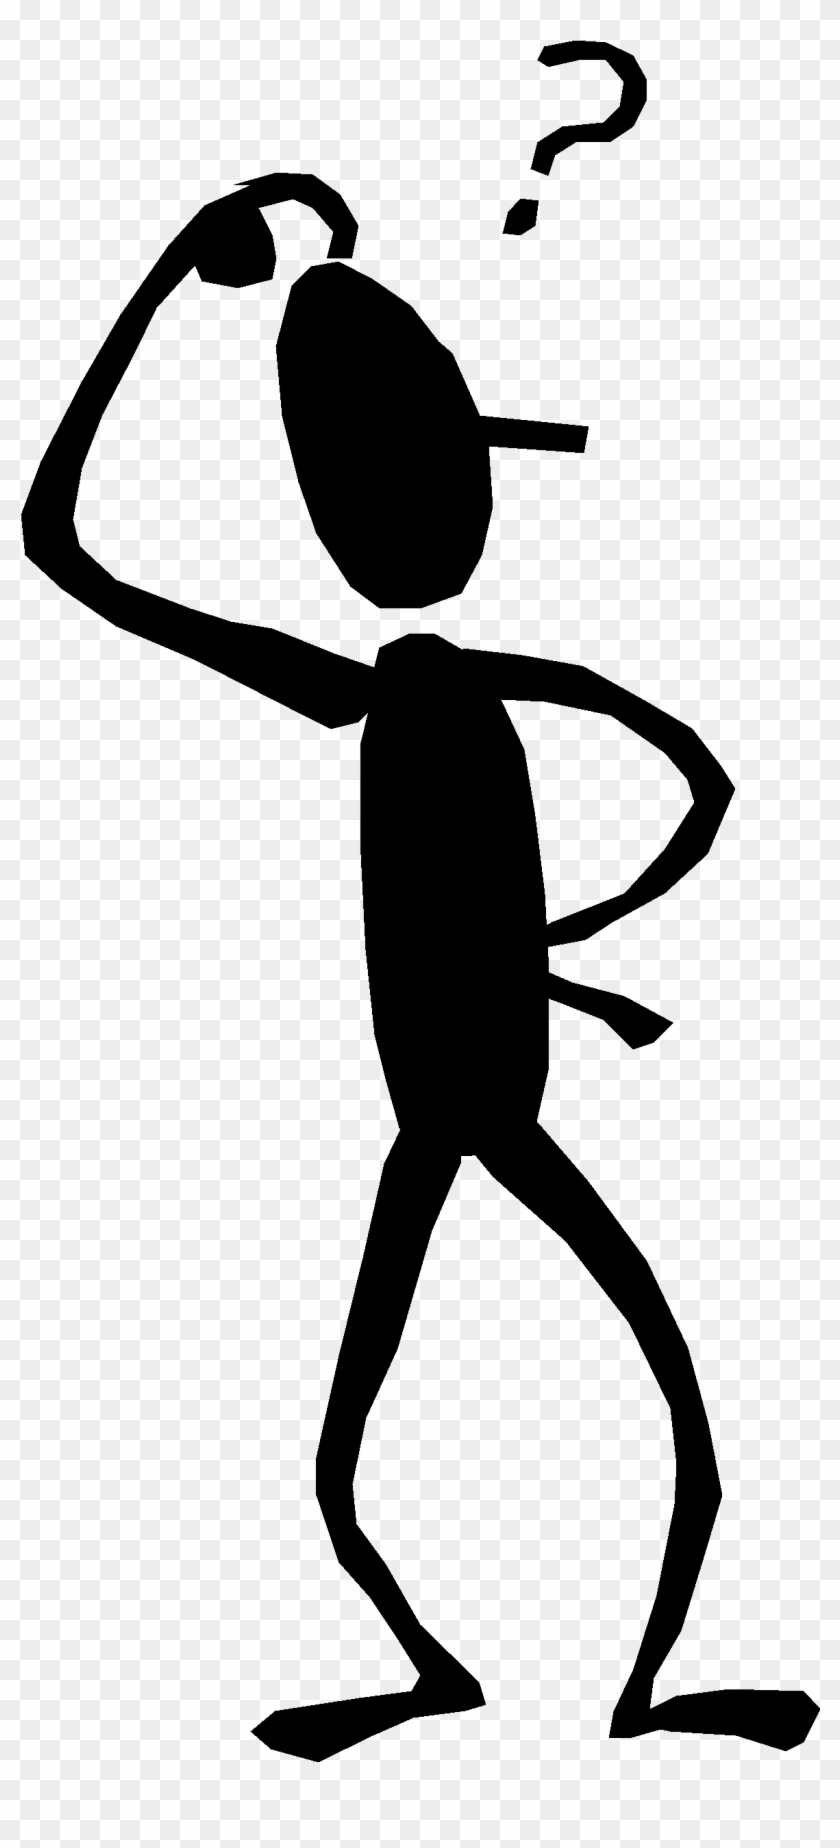 Picture Freeuse Stock Stick Figure Cartoon Question Thinking Stick Figure Png Transparent Png 1218x2621 955471 Pngfind Free for commercial use no attribution required high quality images. picture freeuse stock stick figure